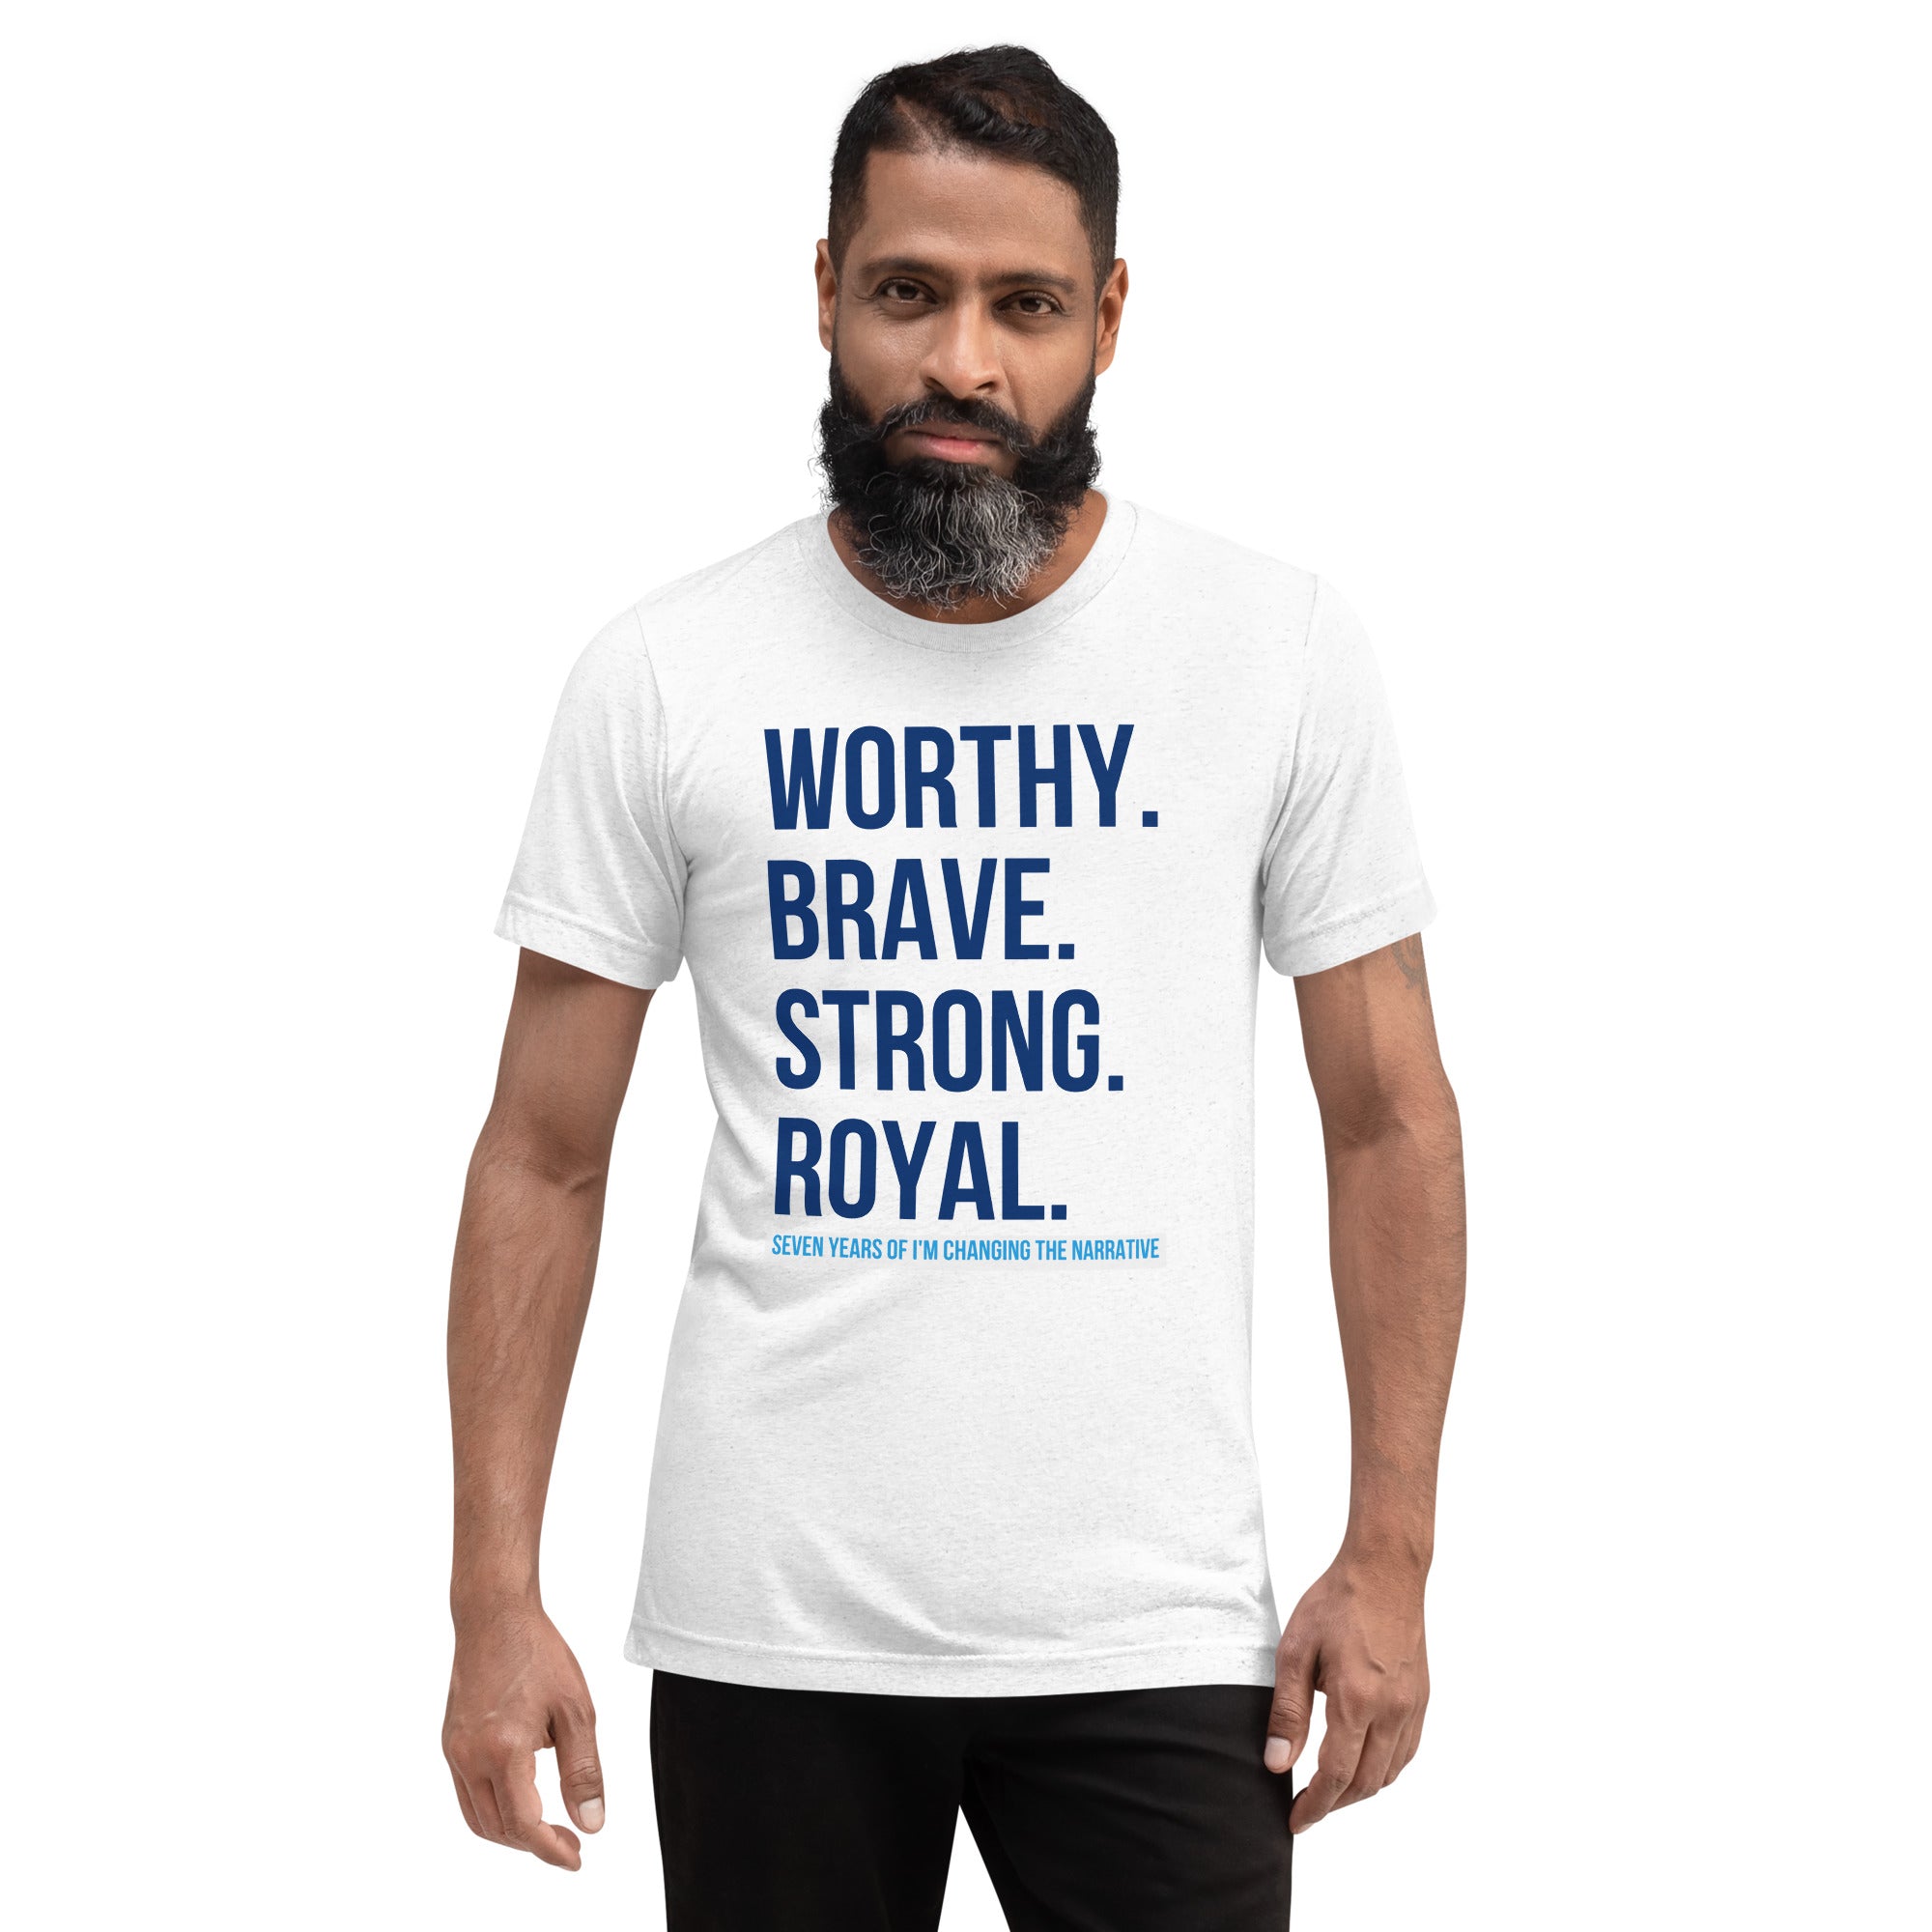 Worthy, Brave, Strong - short sleeve t-shirt